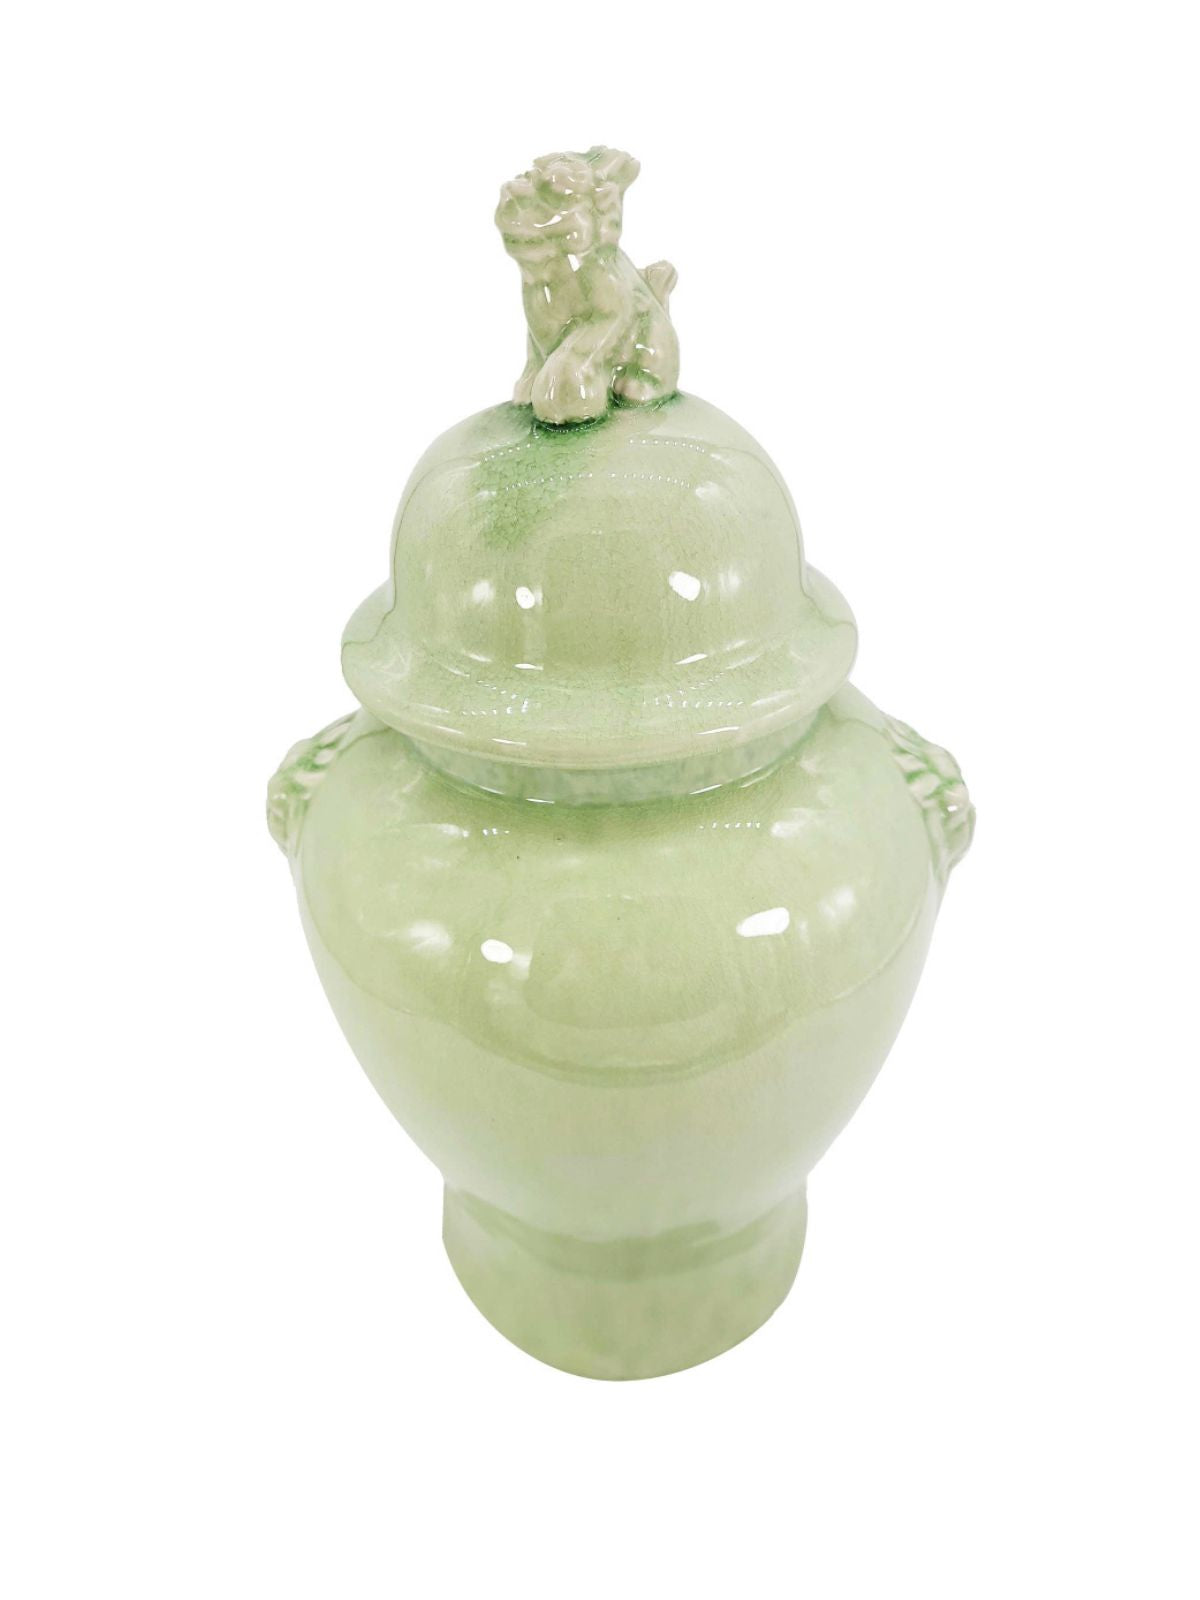 18 inch Mint Green Ceramic Ginger Jar with Guardian Lion Design and Lid, Sold by KYA Home Decor.